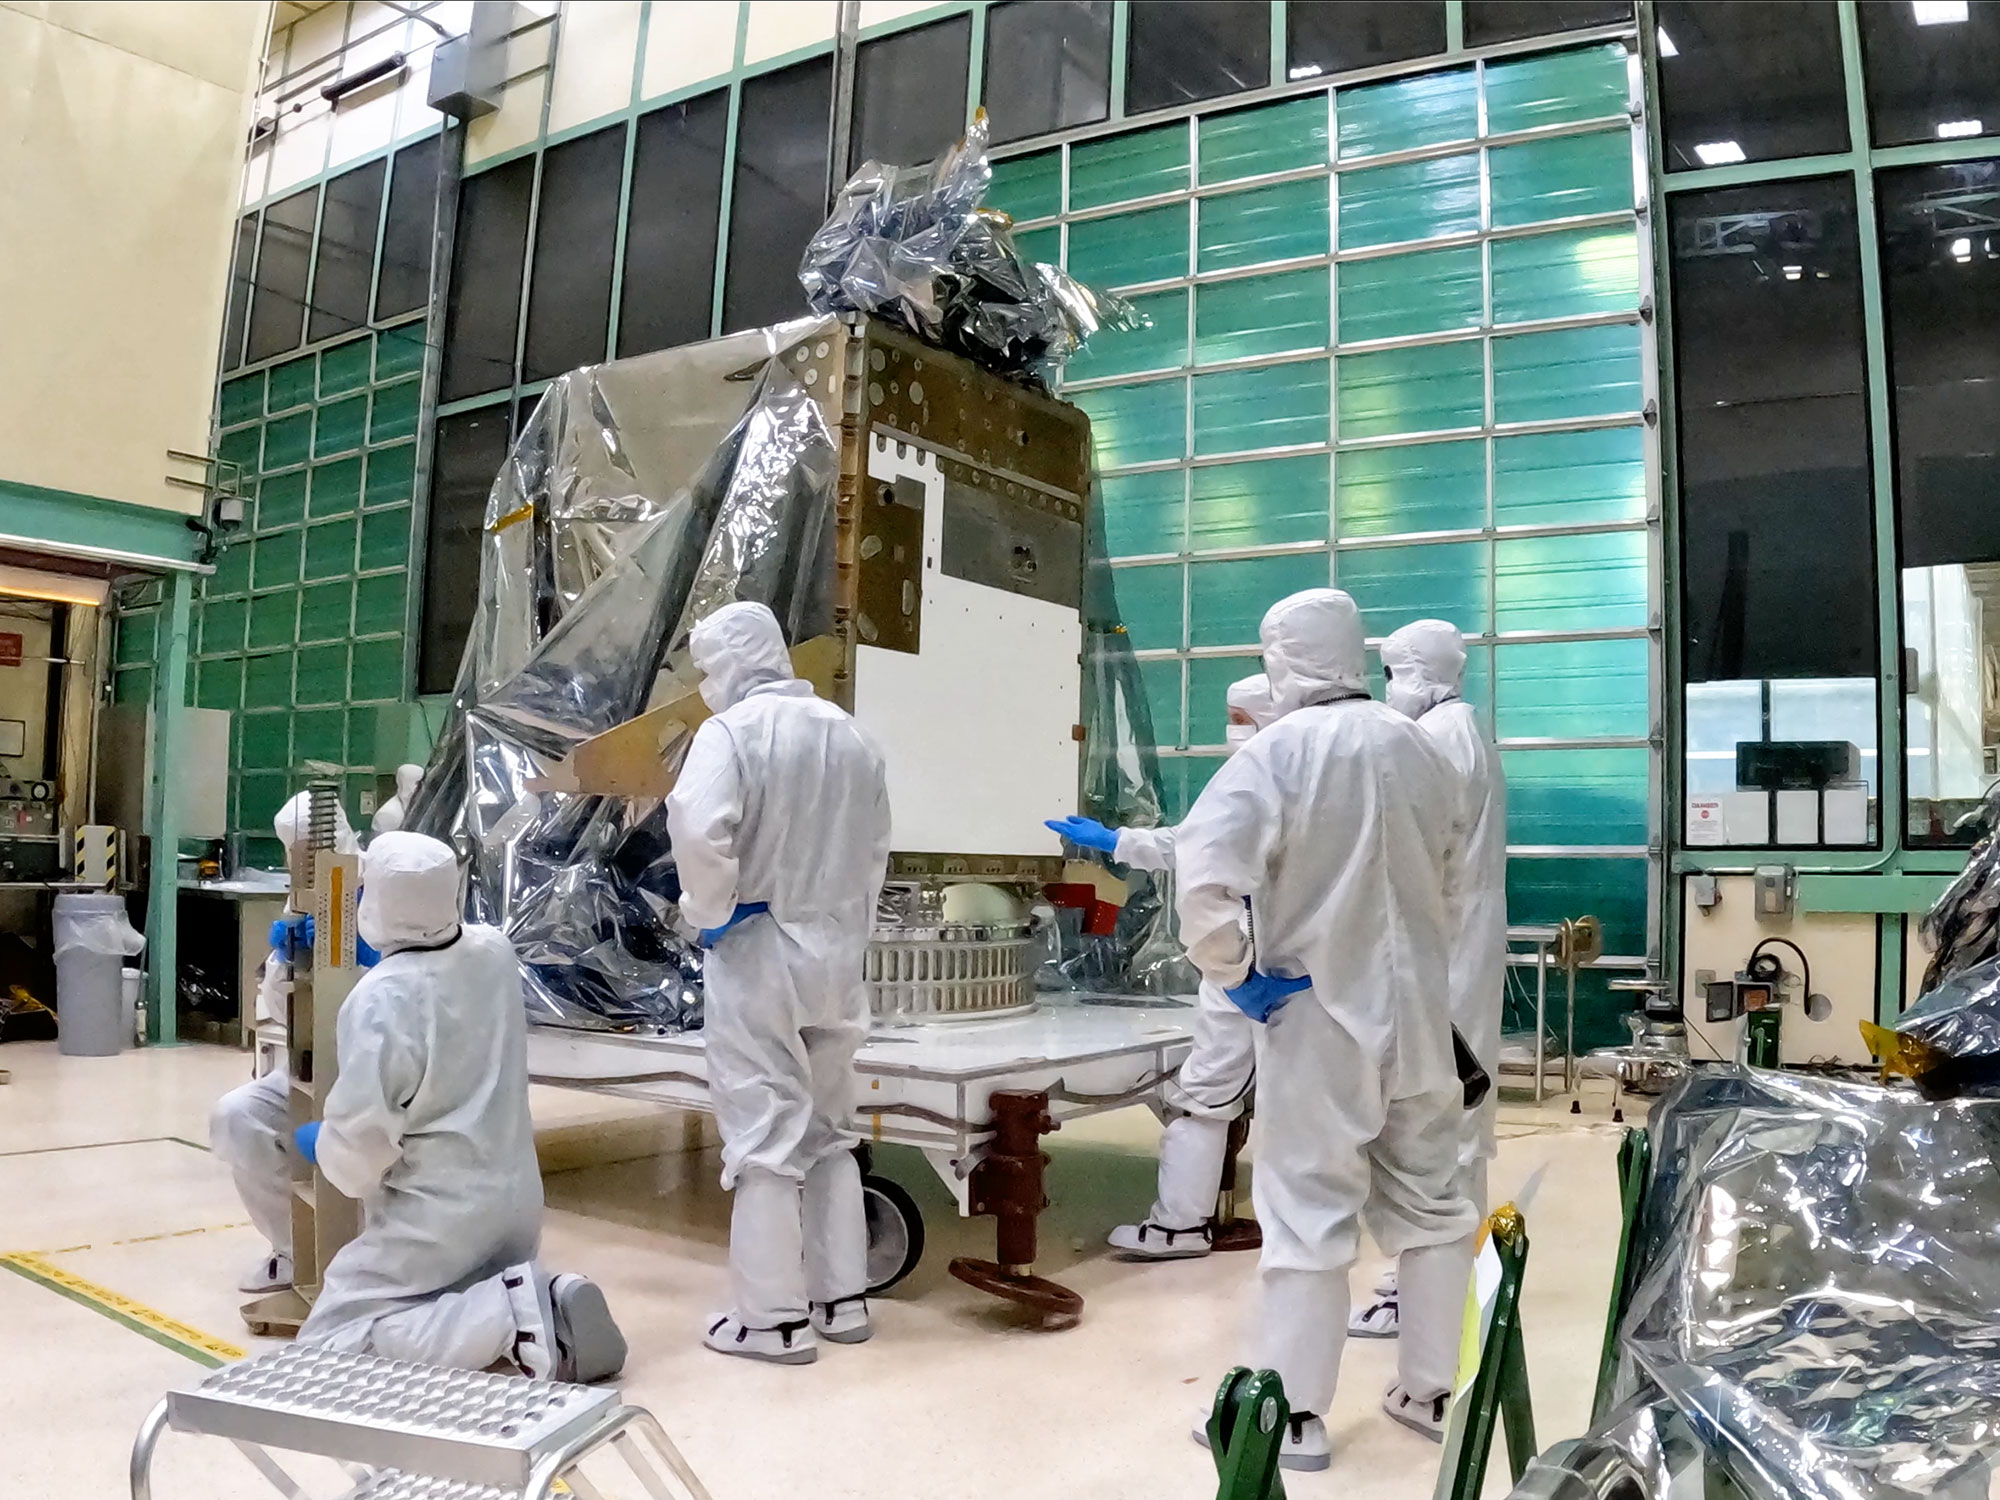 Time-lapse video of working on the +Y Panel of PACE spacecraft at NASA Goddard Space Flight Center.